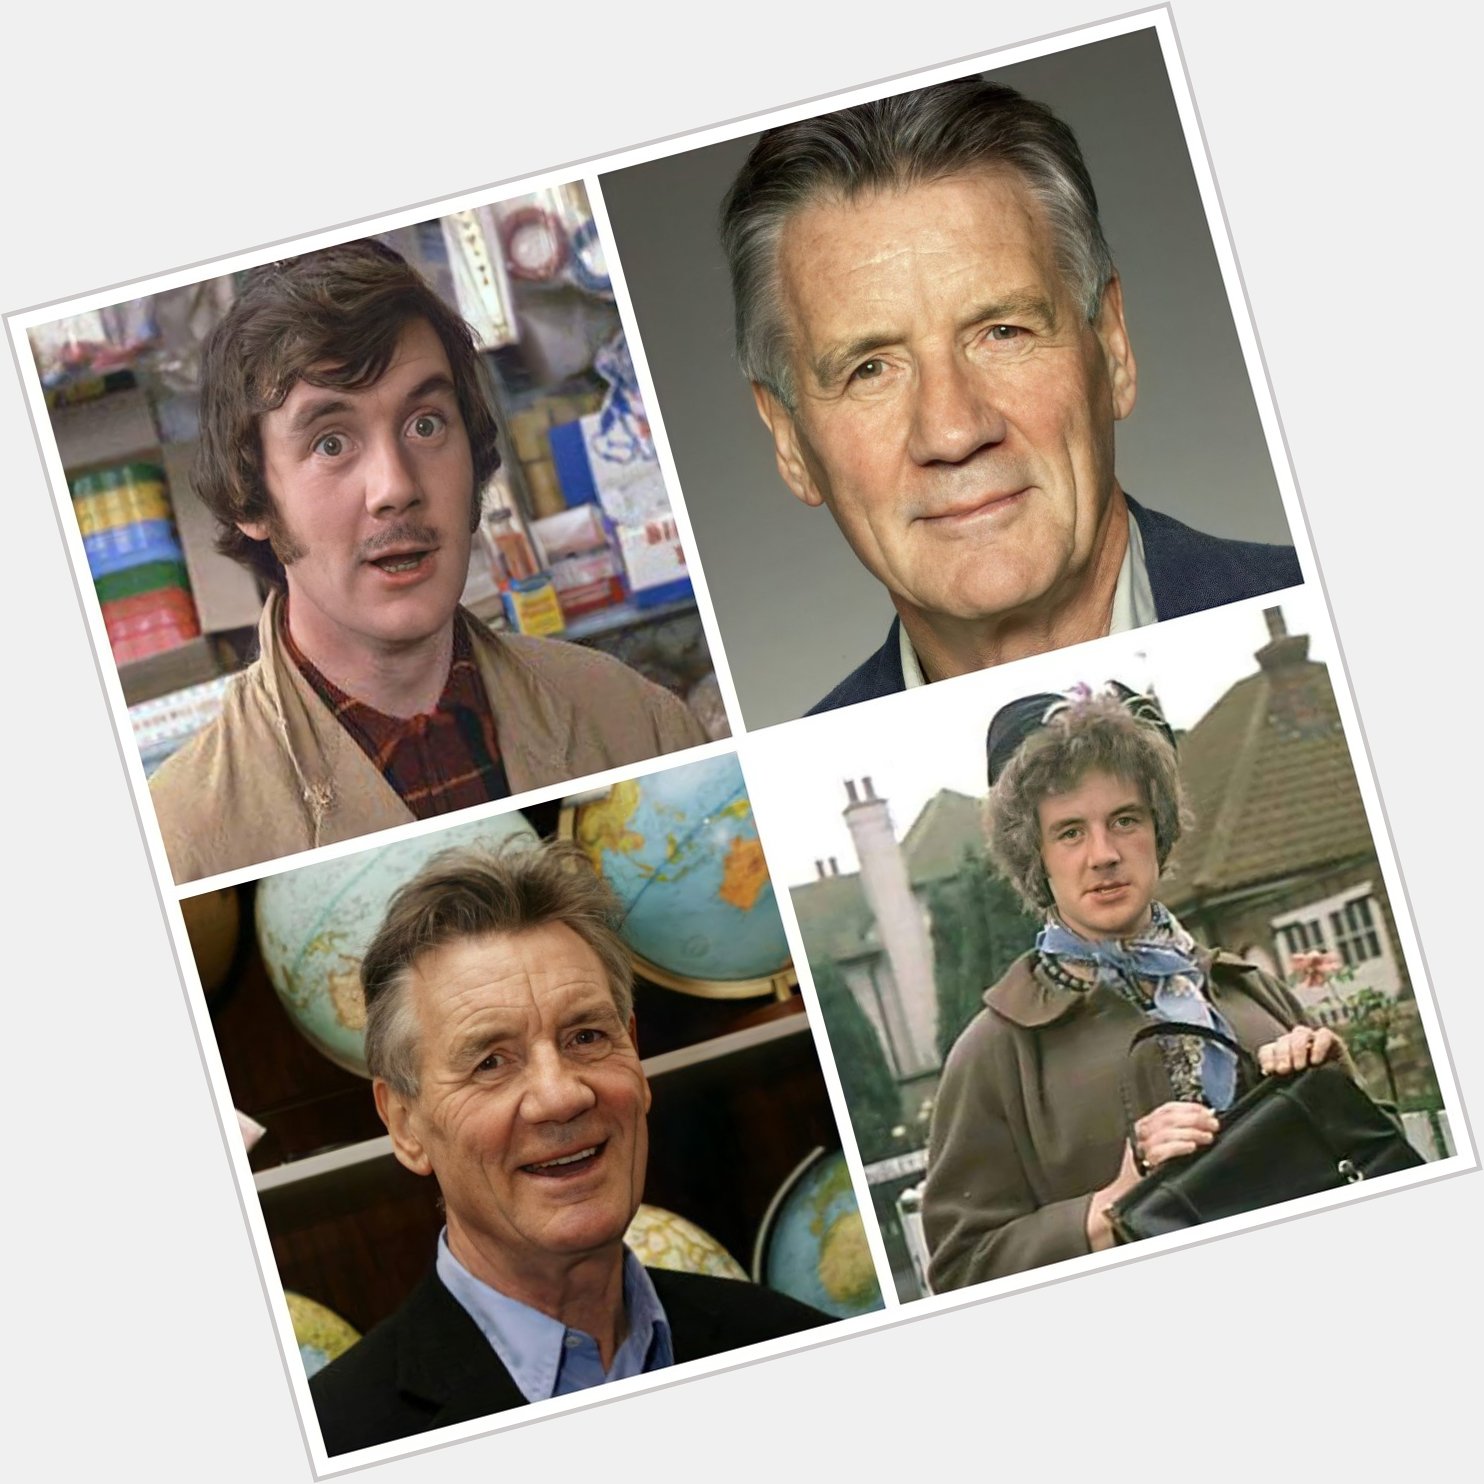 Forgot to say Happy Birthday to Sir Michael Palin who turned 78 yesterday!   